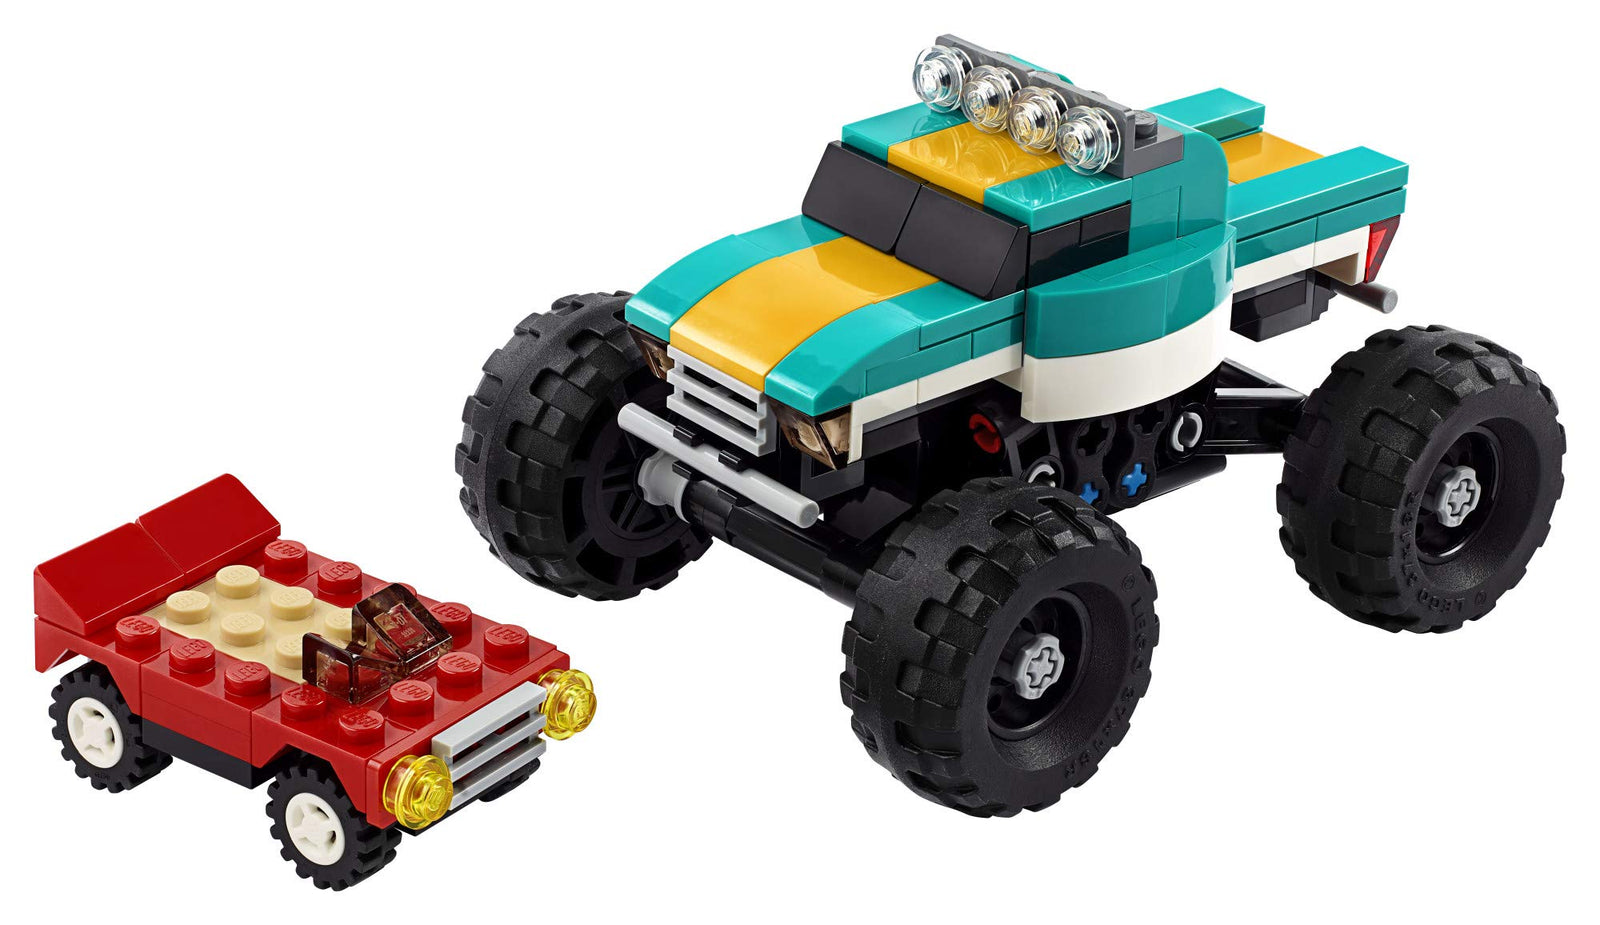 LEGO Creator 3in1 Monster Truck Toy 31101 Cool Building Kit for Kids (163 Pieces)